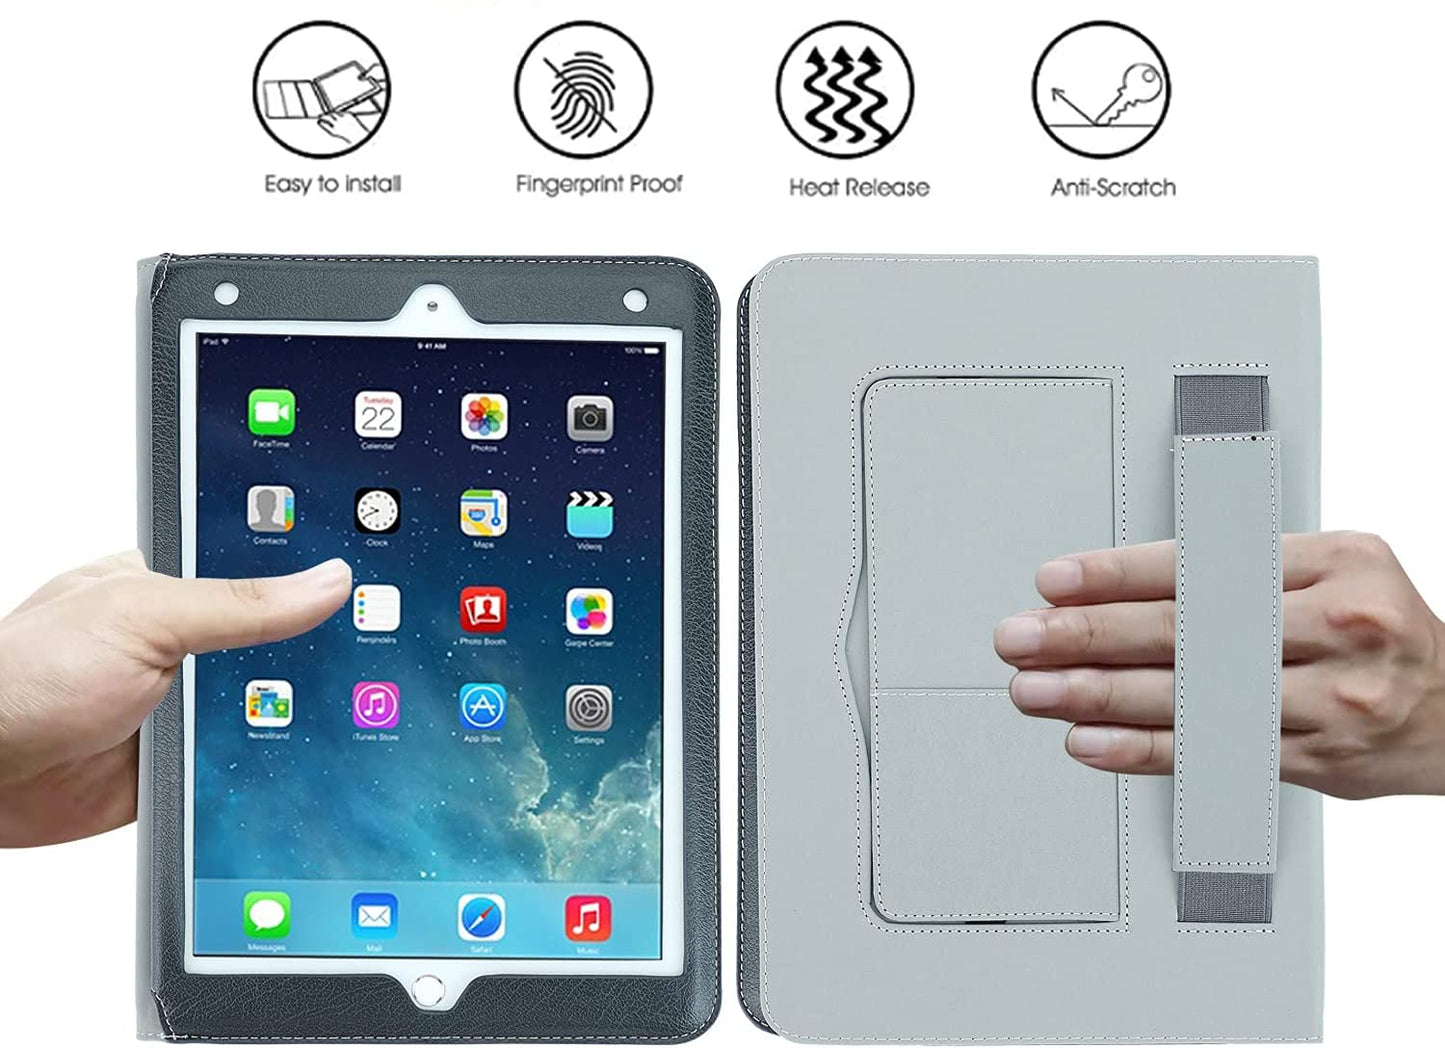 iPad Case 10.5 inch, Magnetic Closure Card Slot Smart Cover